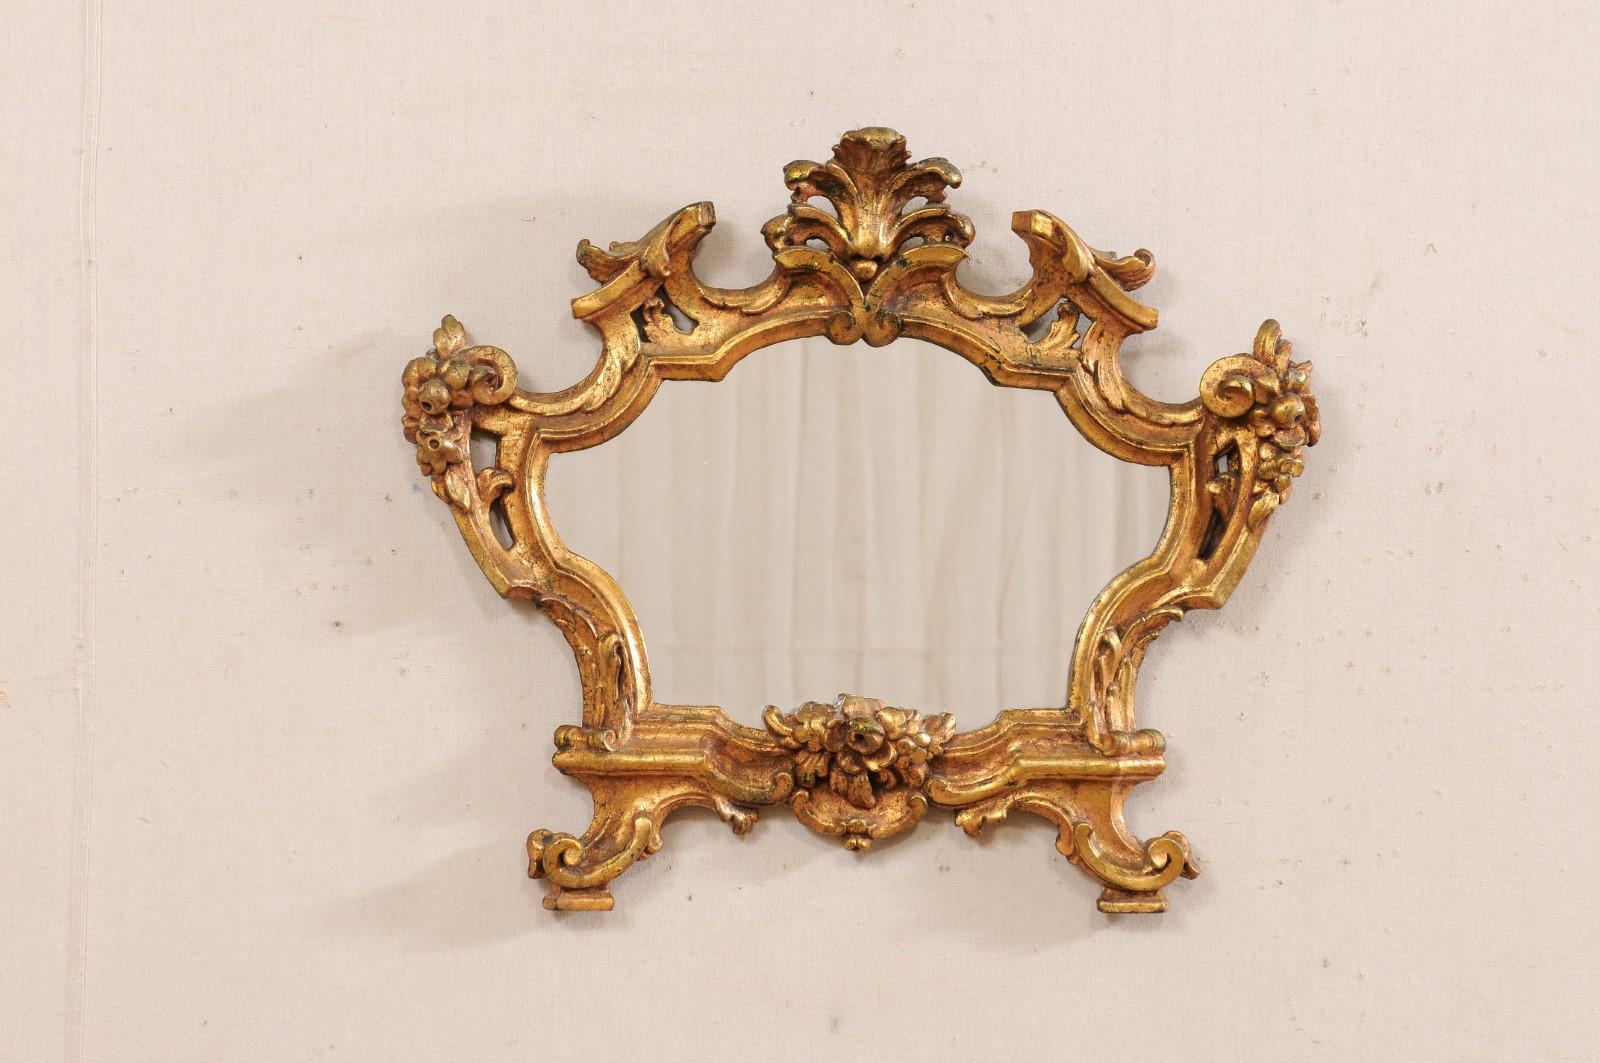 An Italian carved and gilt wood mirror from the 19th century. This antique mirror from Italy displays a richly carved body embellished with scrolled foliate designs, clusters of blooms at each shoulder and anchoring central bottom, with curved leaf